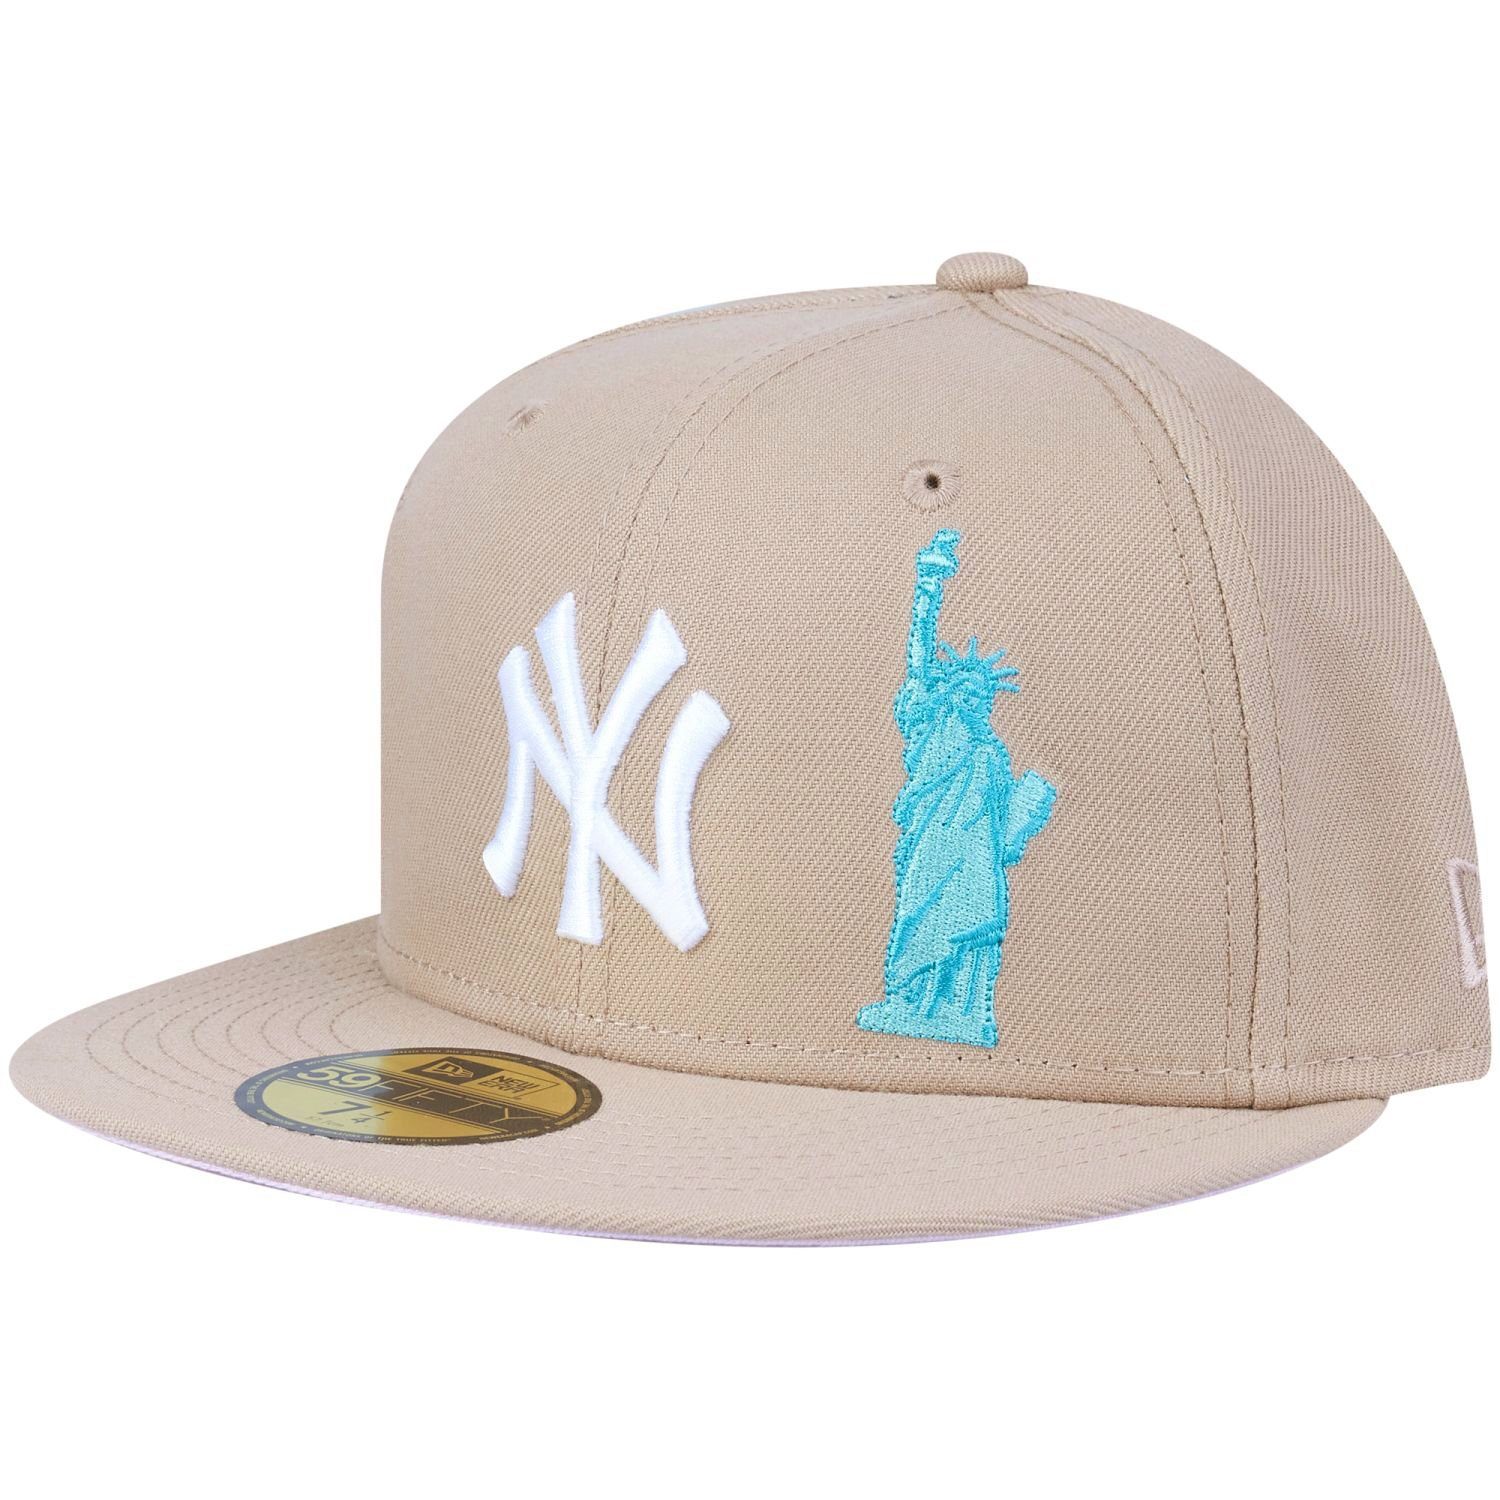 Cap 59Fifty SERIES New WORLD New Era York Fitted Yankees